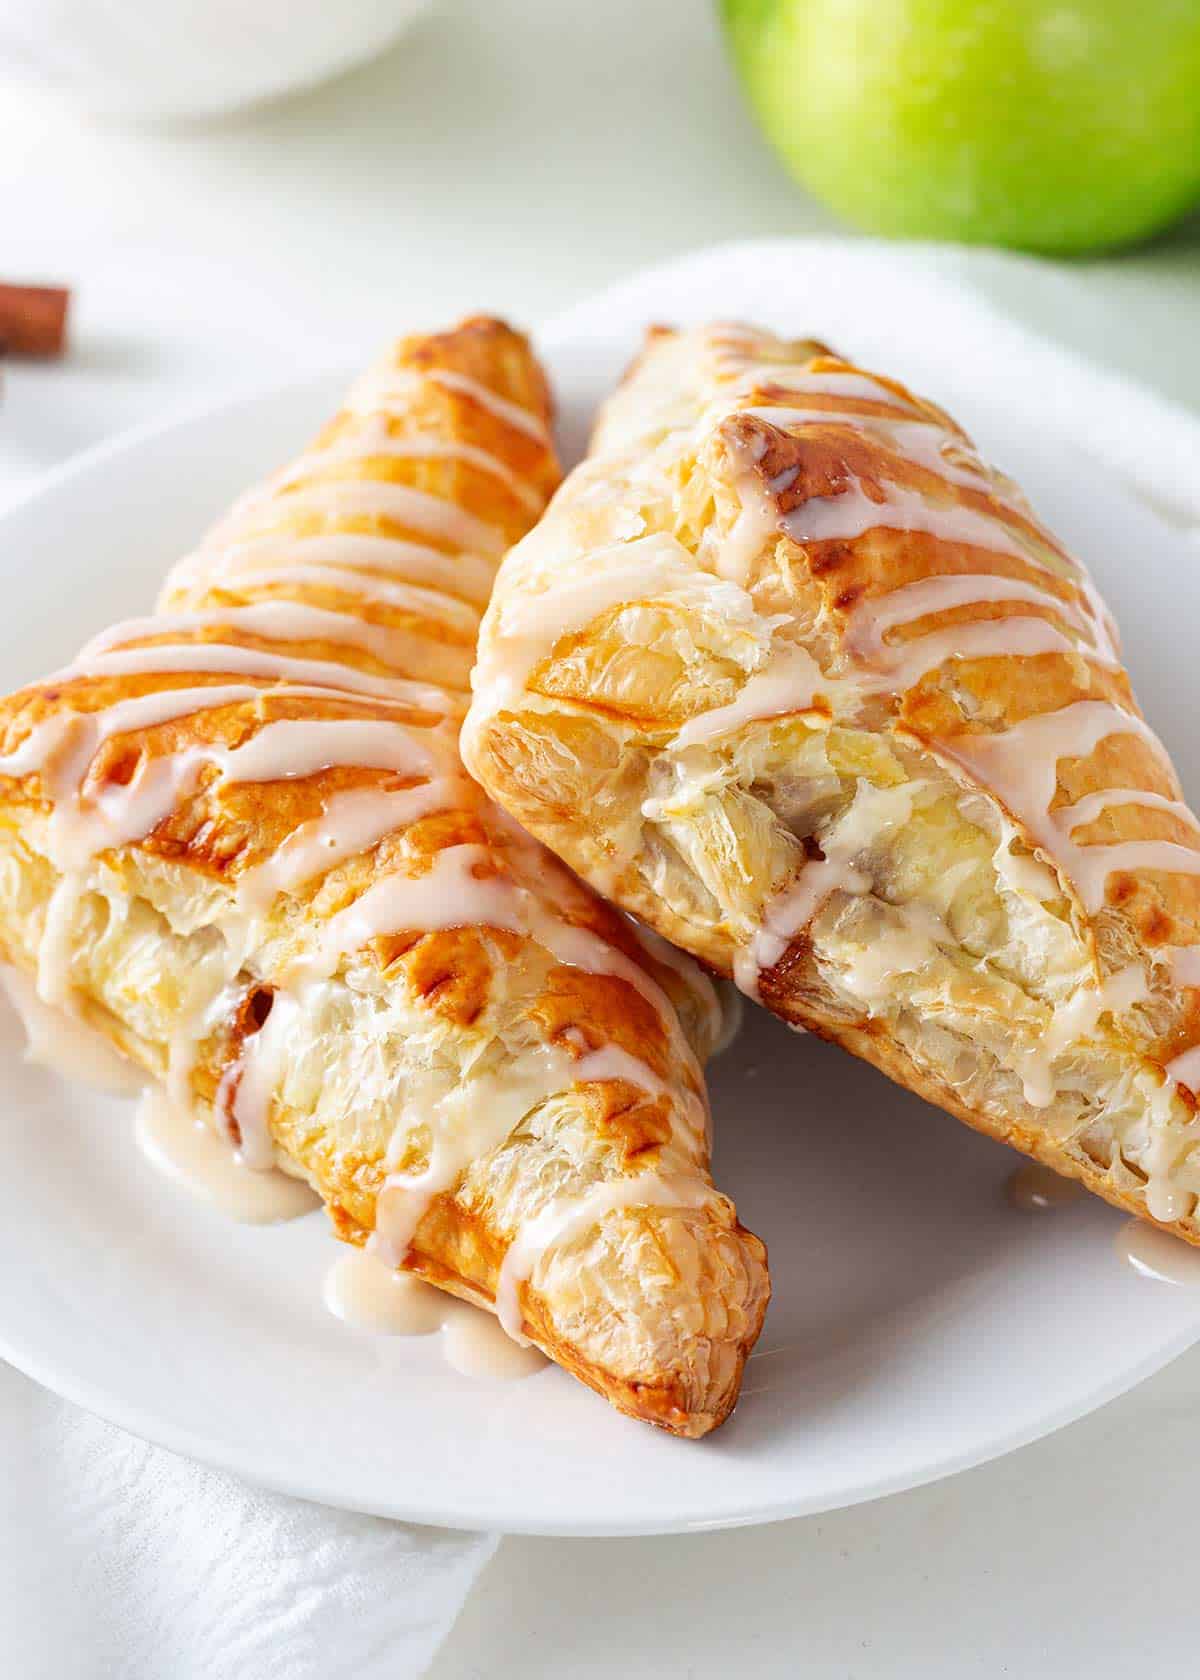 Apple turnovers on a white plate.